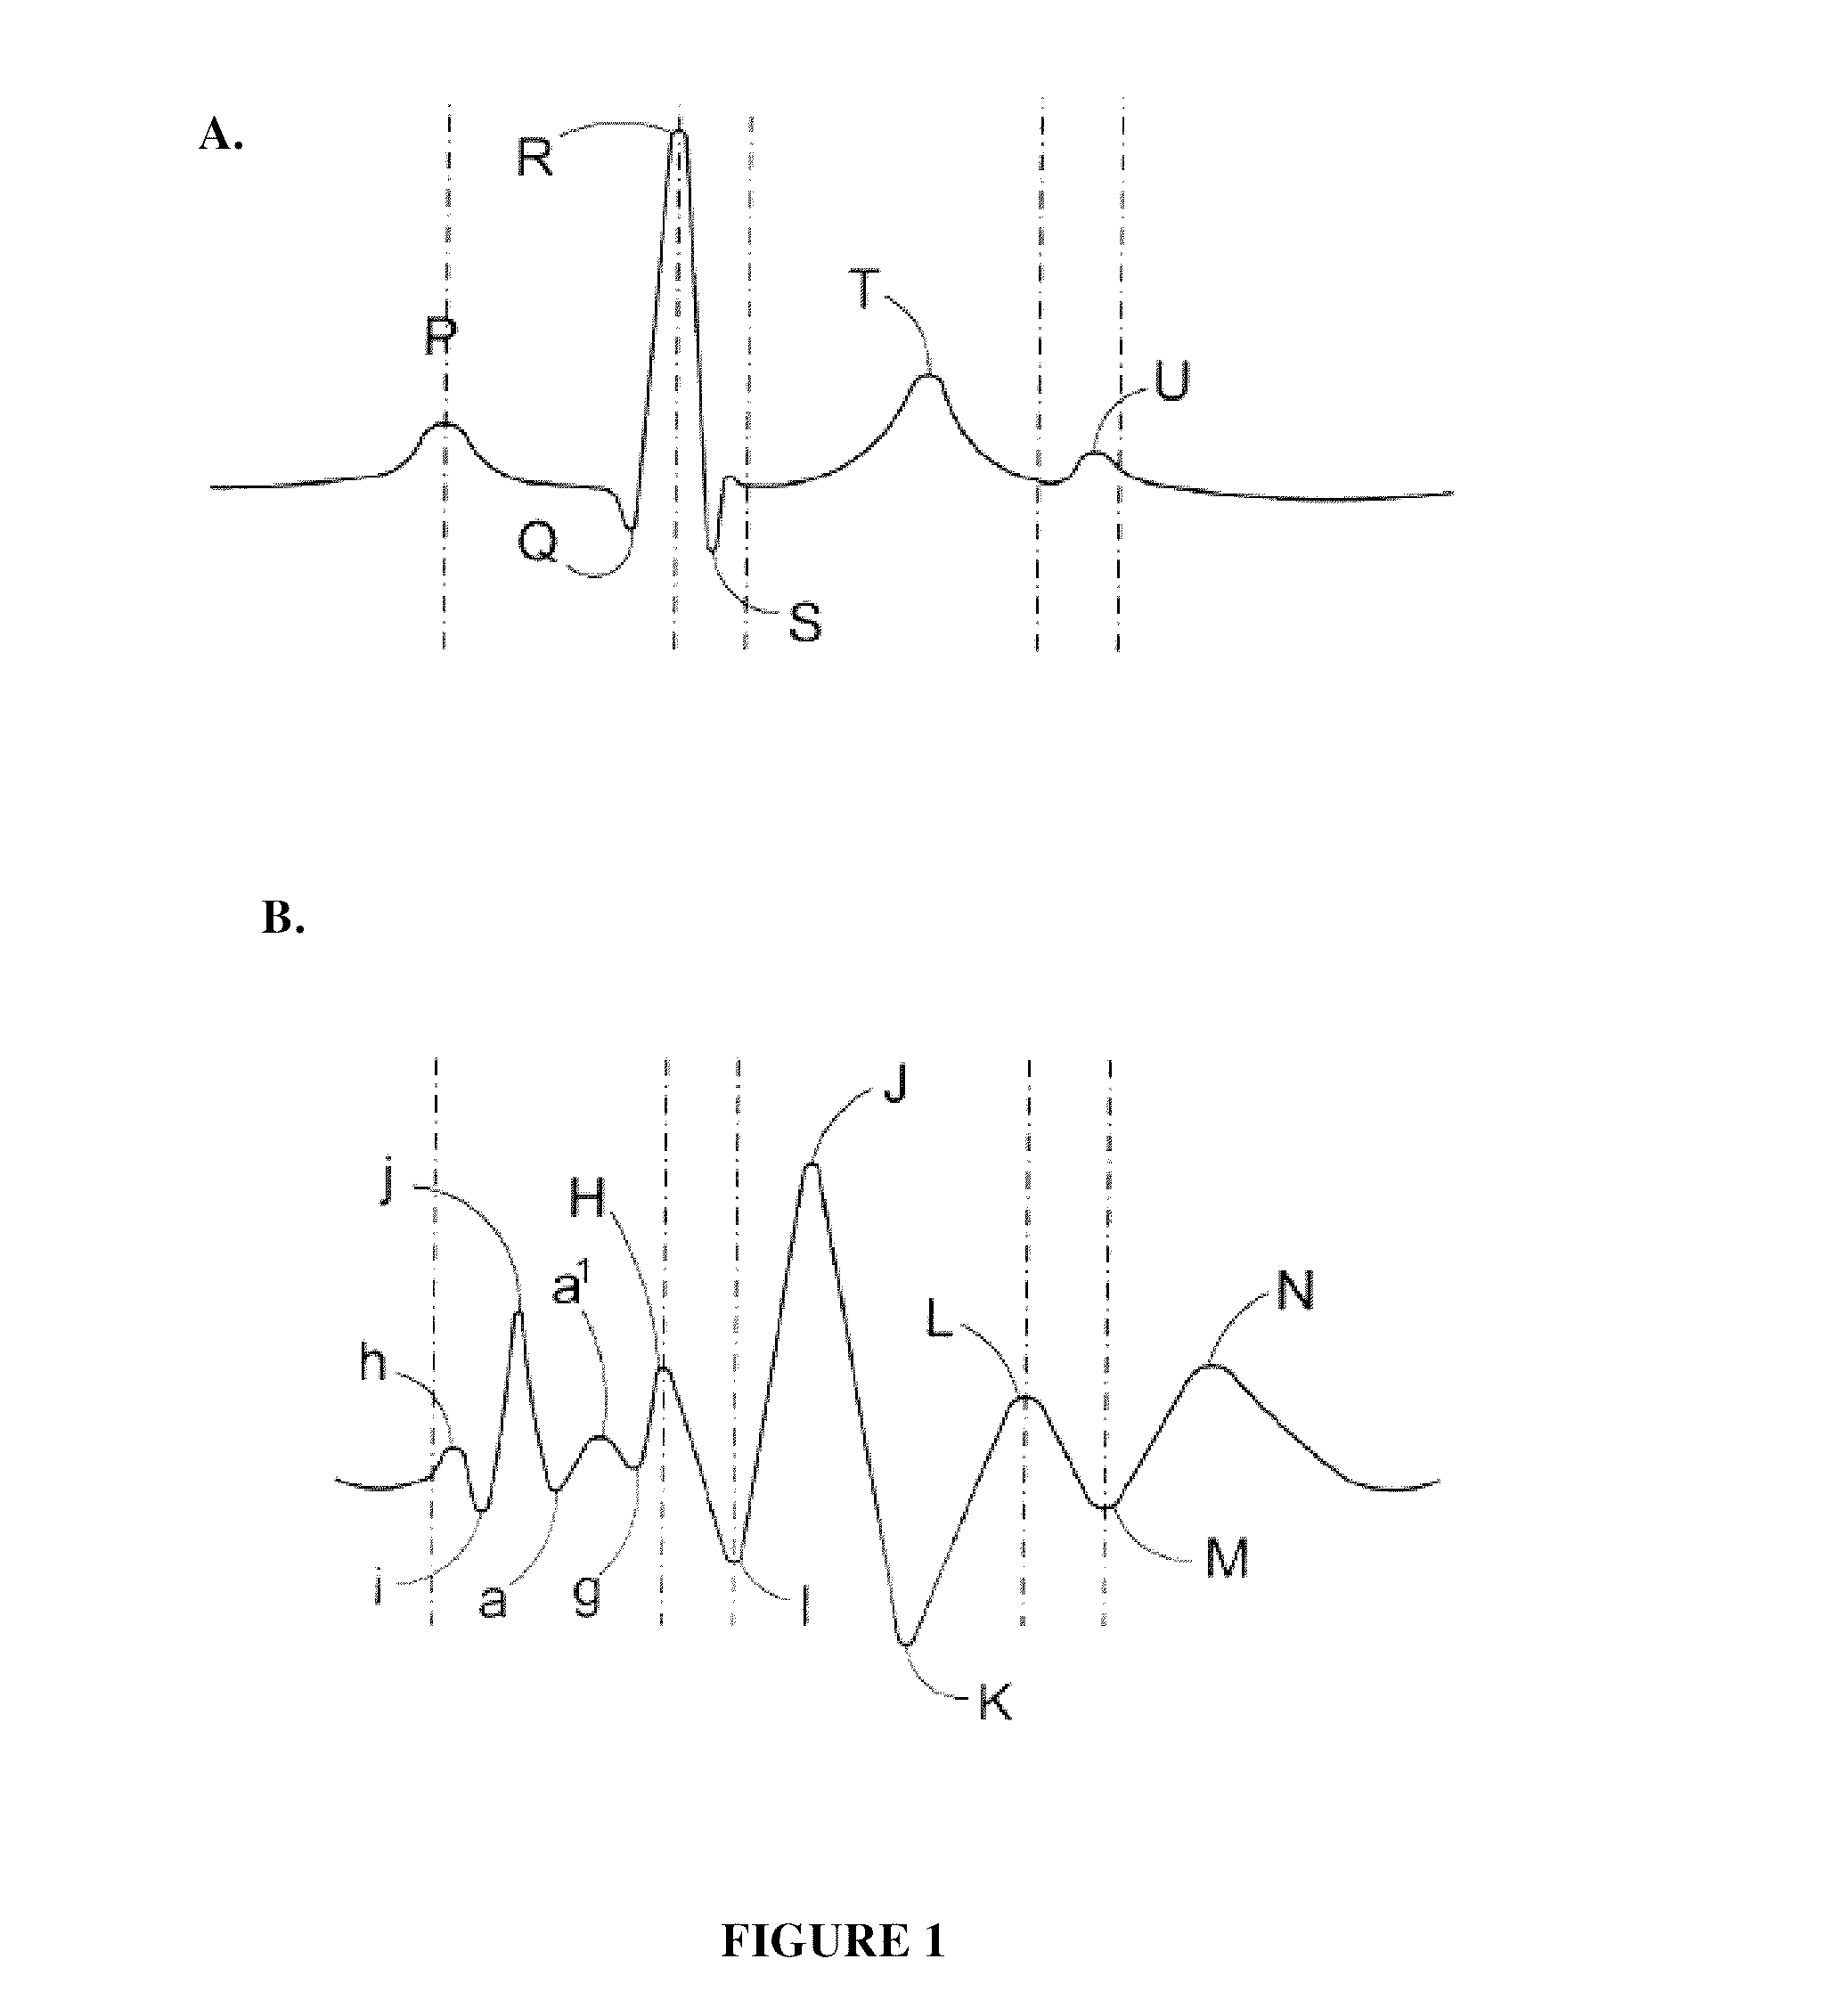 Method and apparatus for obtaining and processing ballistocardiograph data